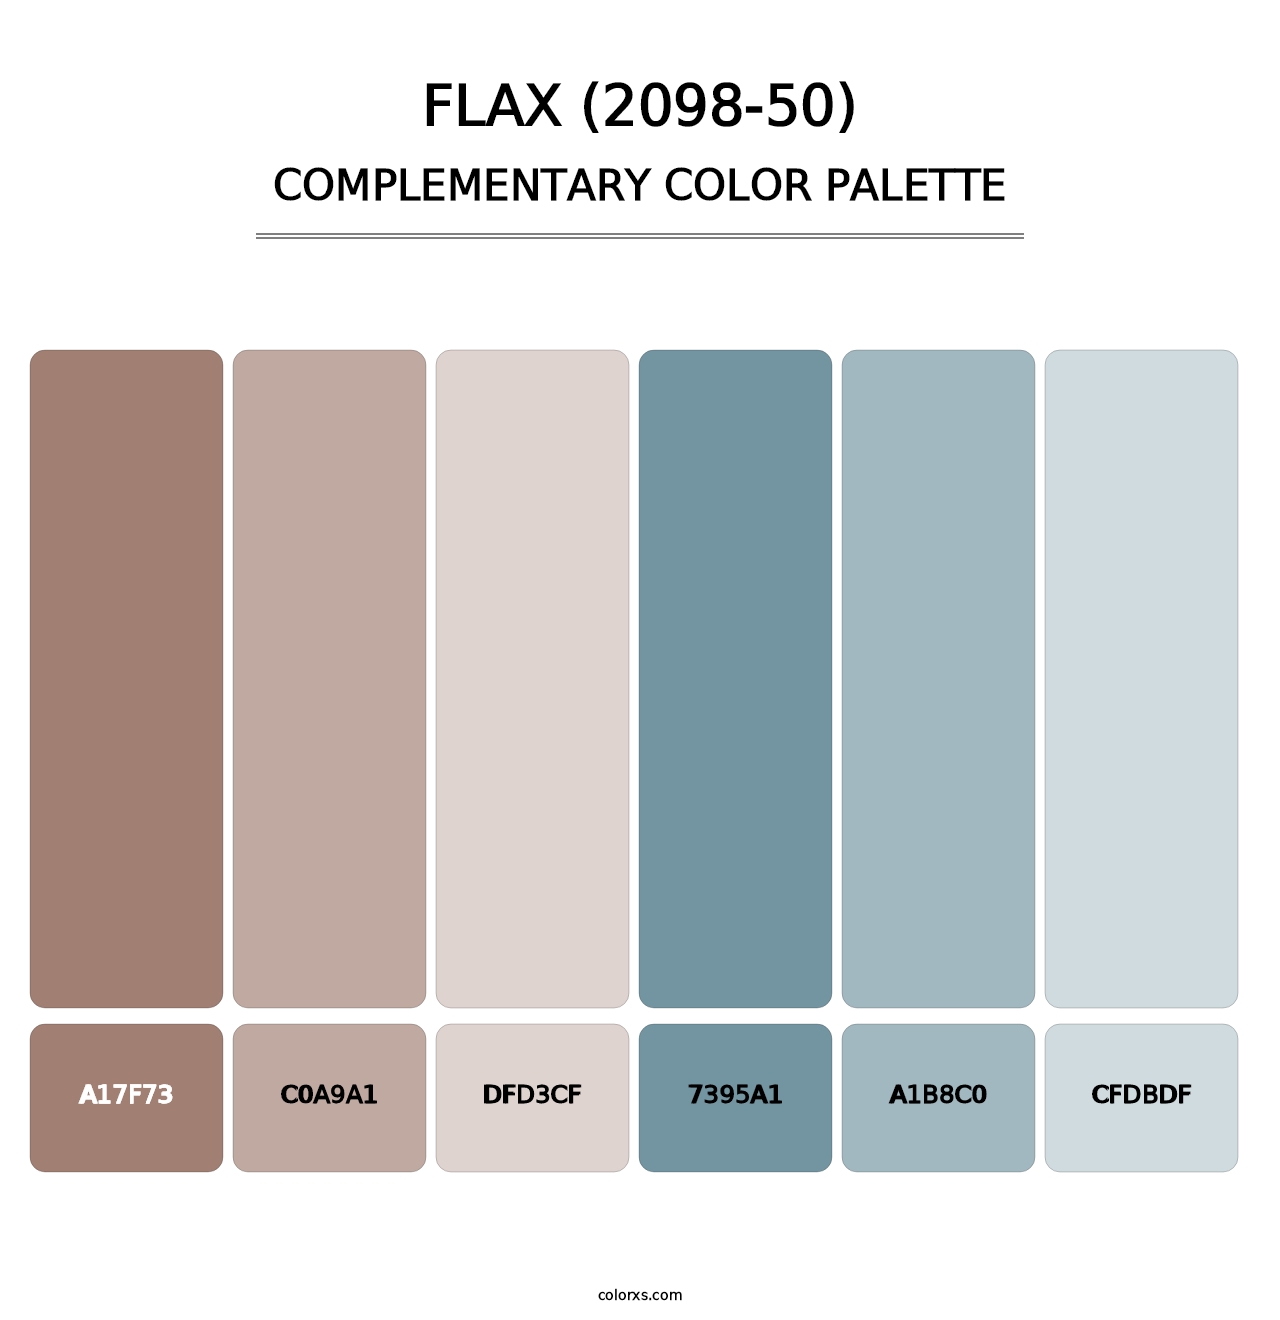 Flax (2098-50) - Complementary Color Palette